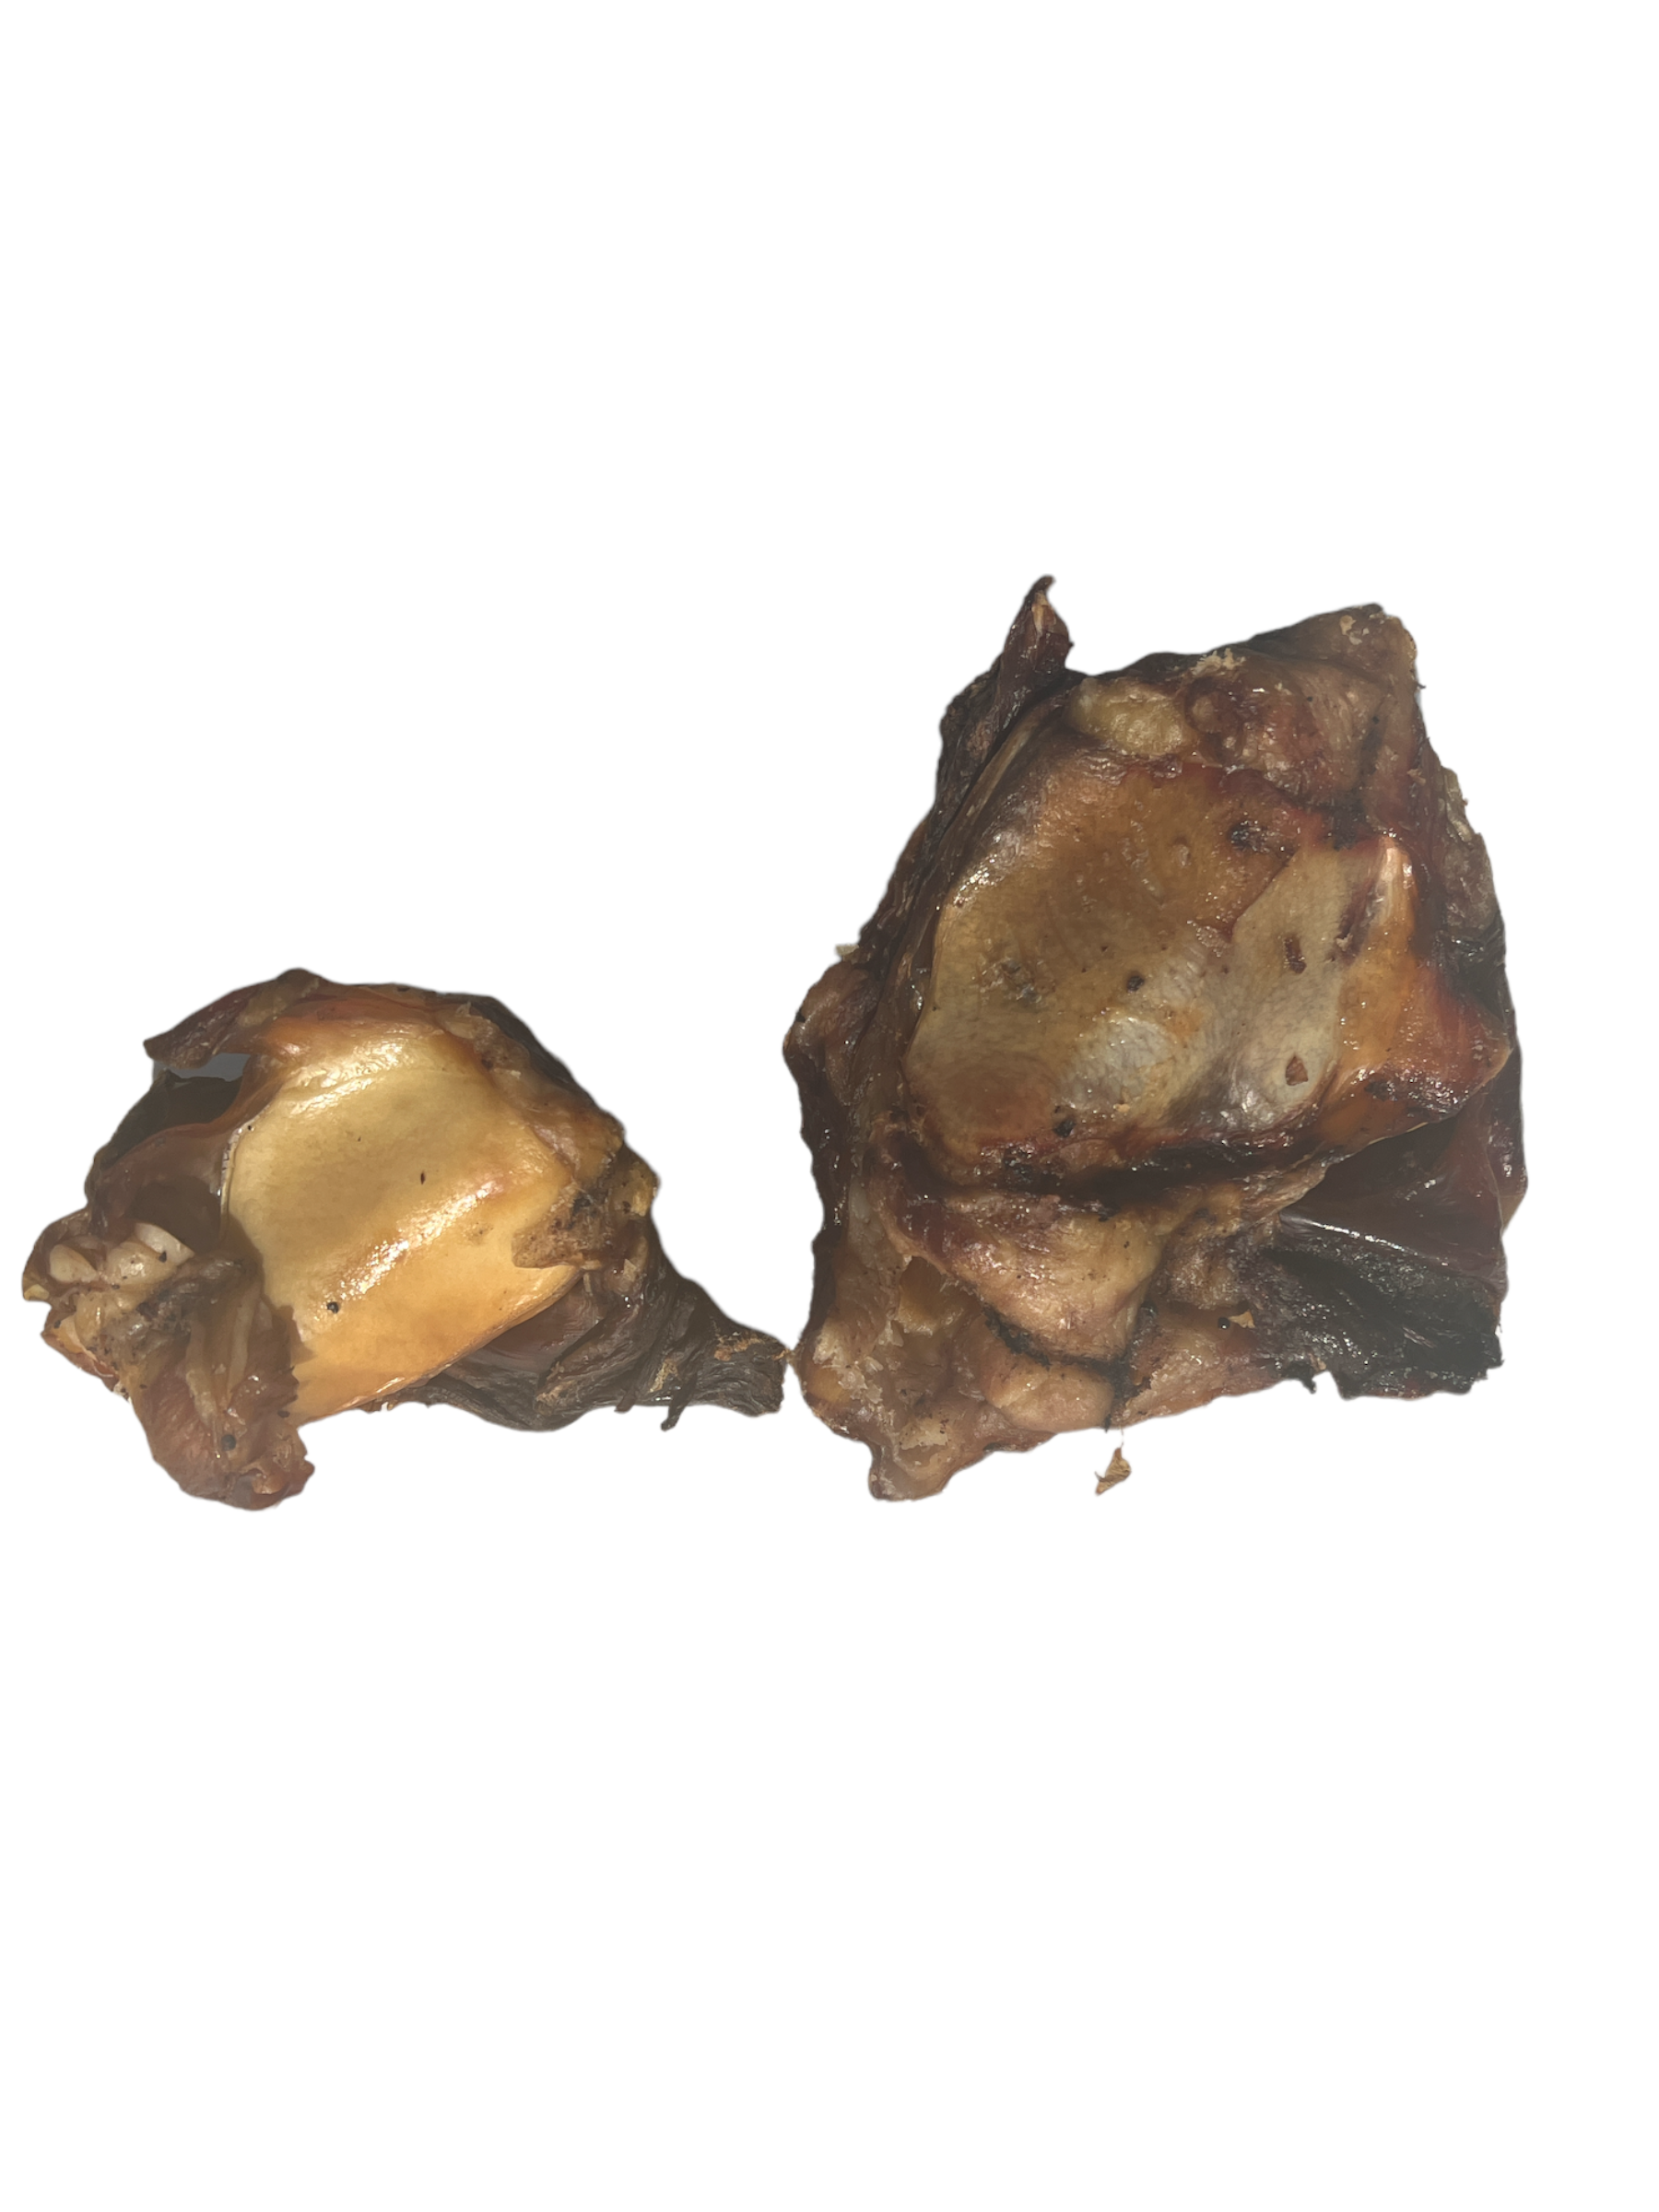 Beef Knee Cap for dogs, comparison of larger and smaller